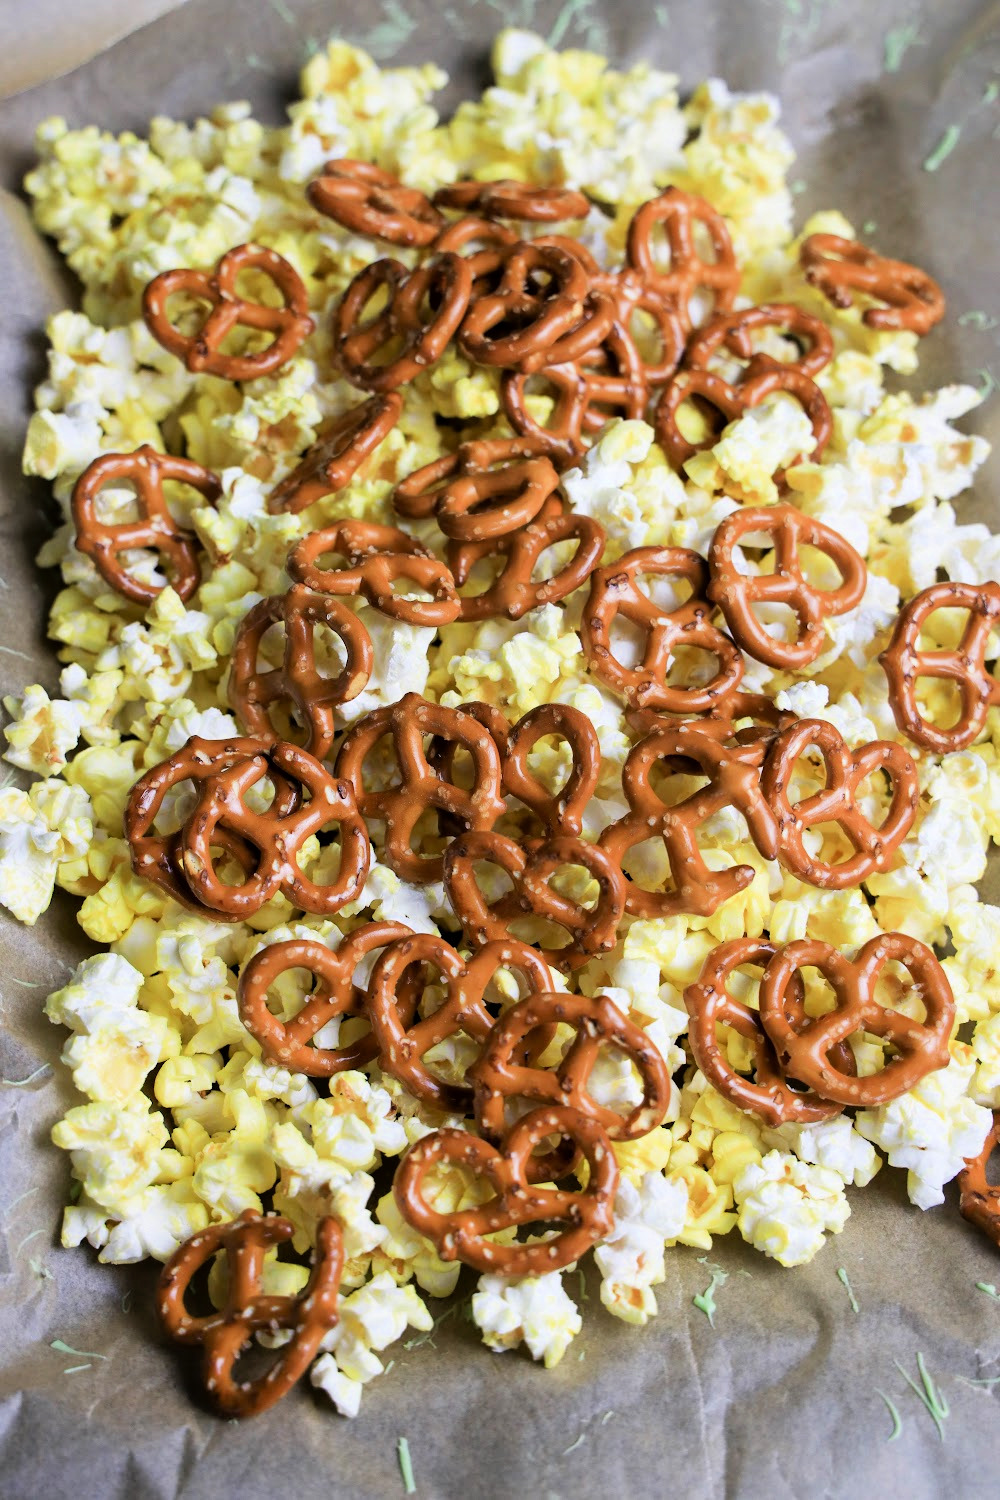 Next, layer some mini pretzels on top of the popcorn. You could use pretzel sticks instead. Or, add some flavored mini pretzels.